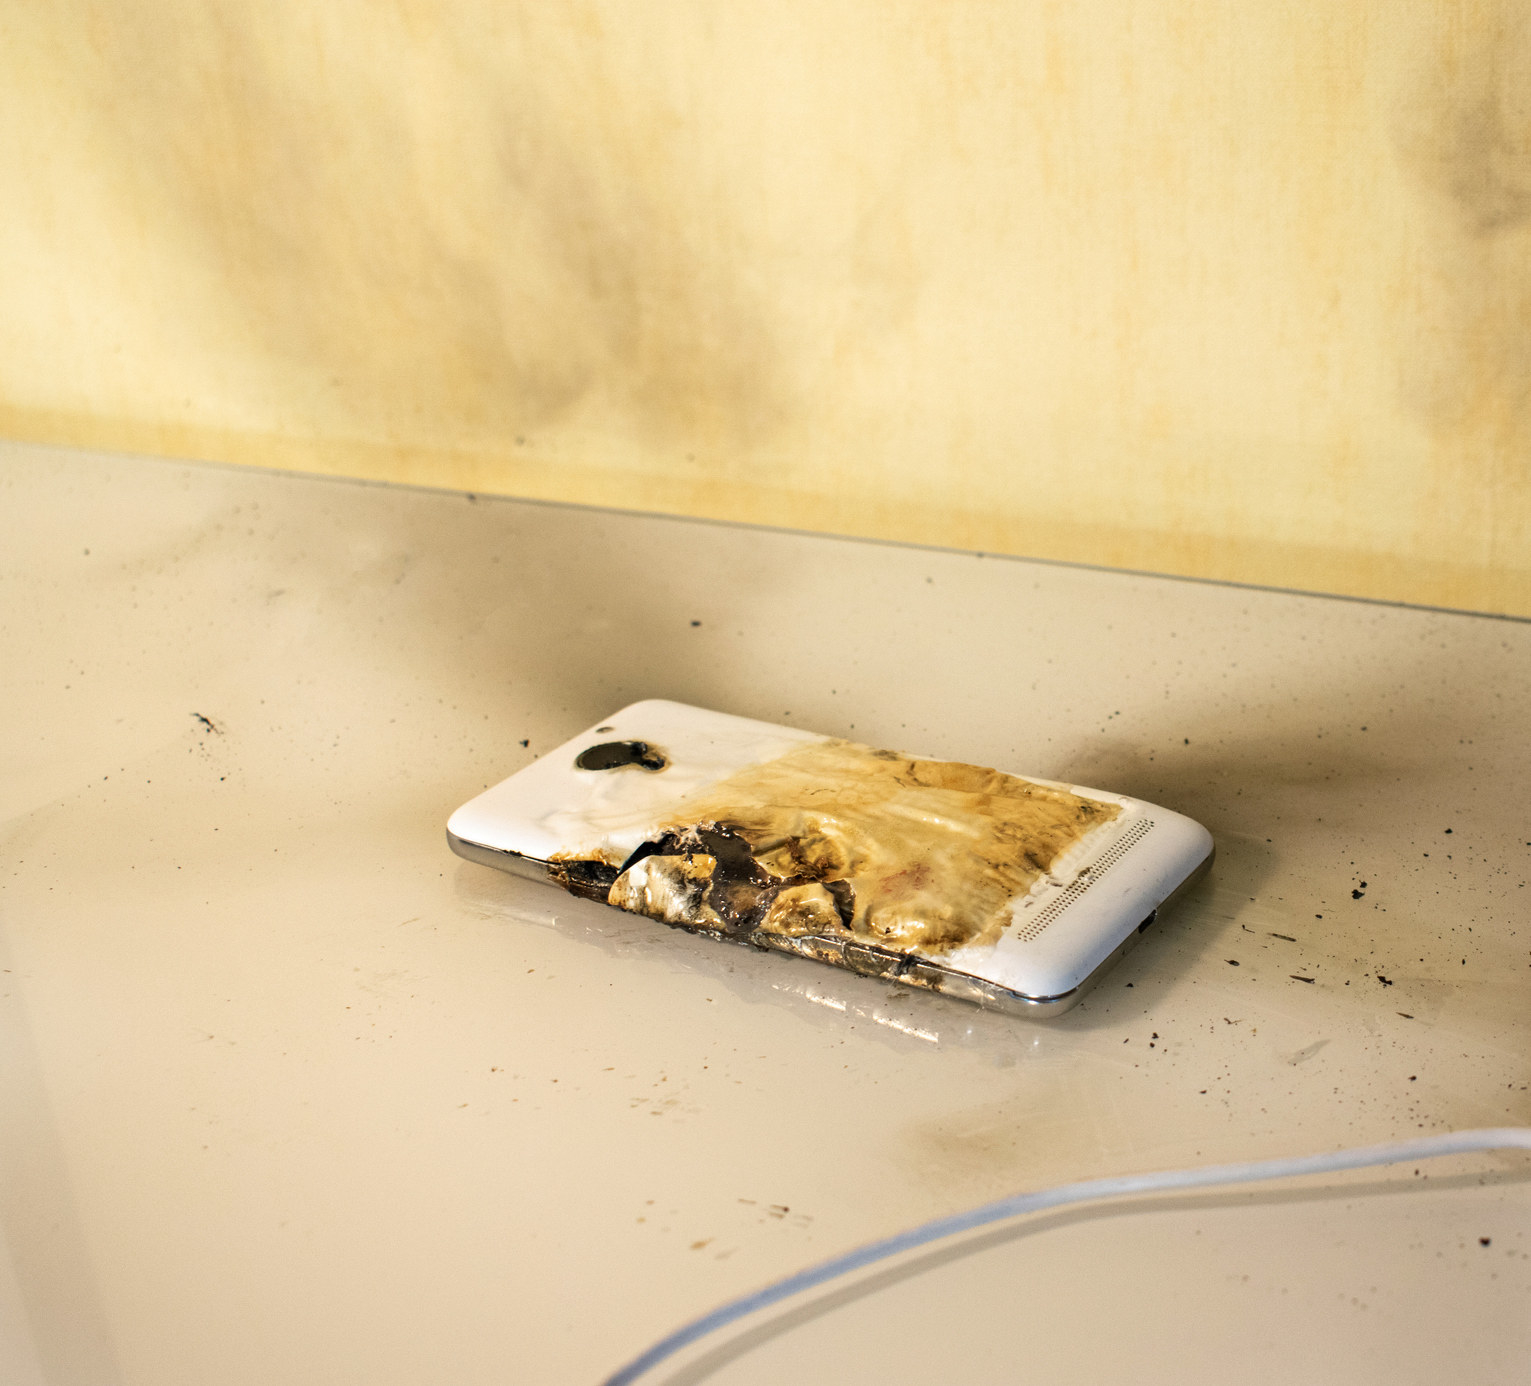 Melted cell phone